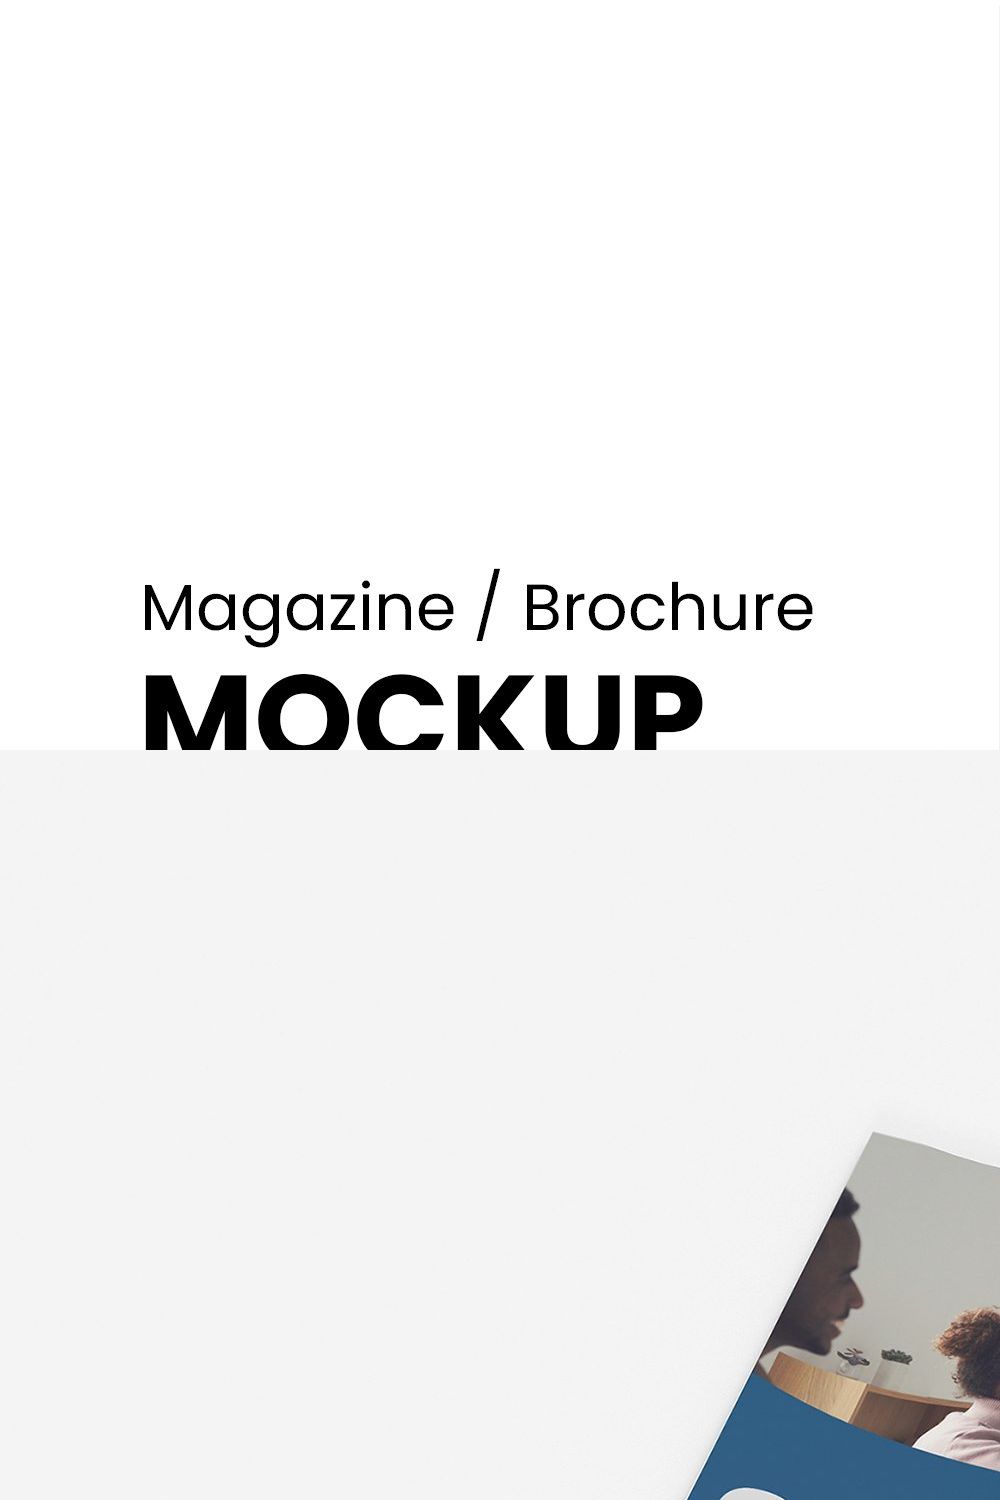 Magazine and brochure mockup pinterest preview image.